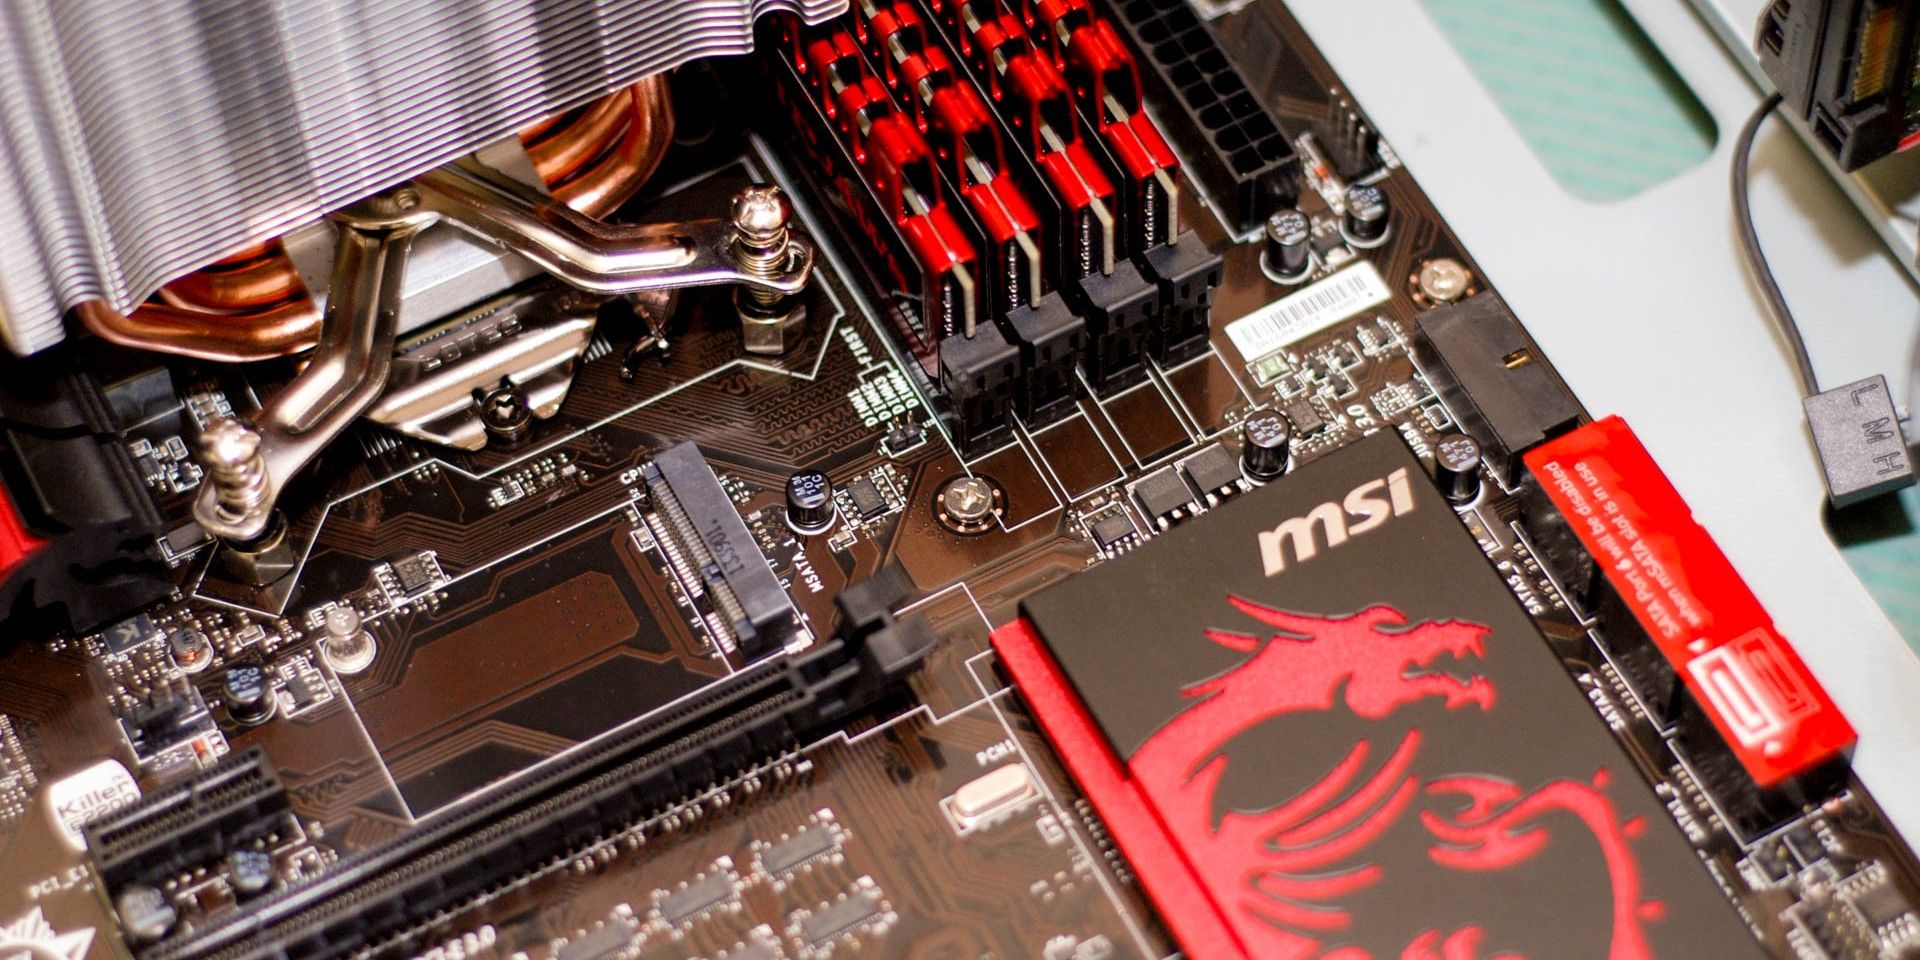 MSI motherboard showing its cooling